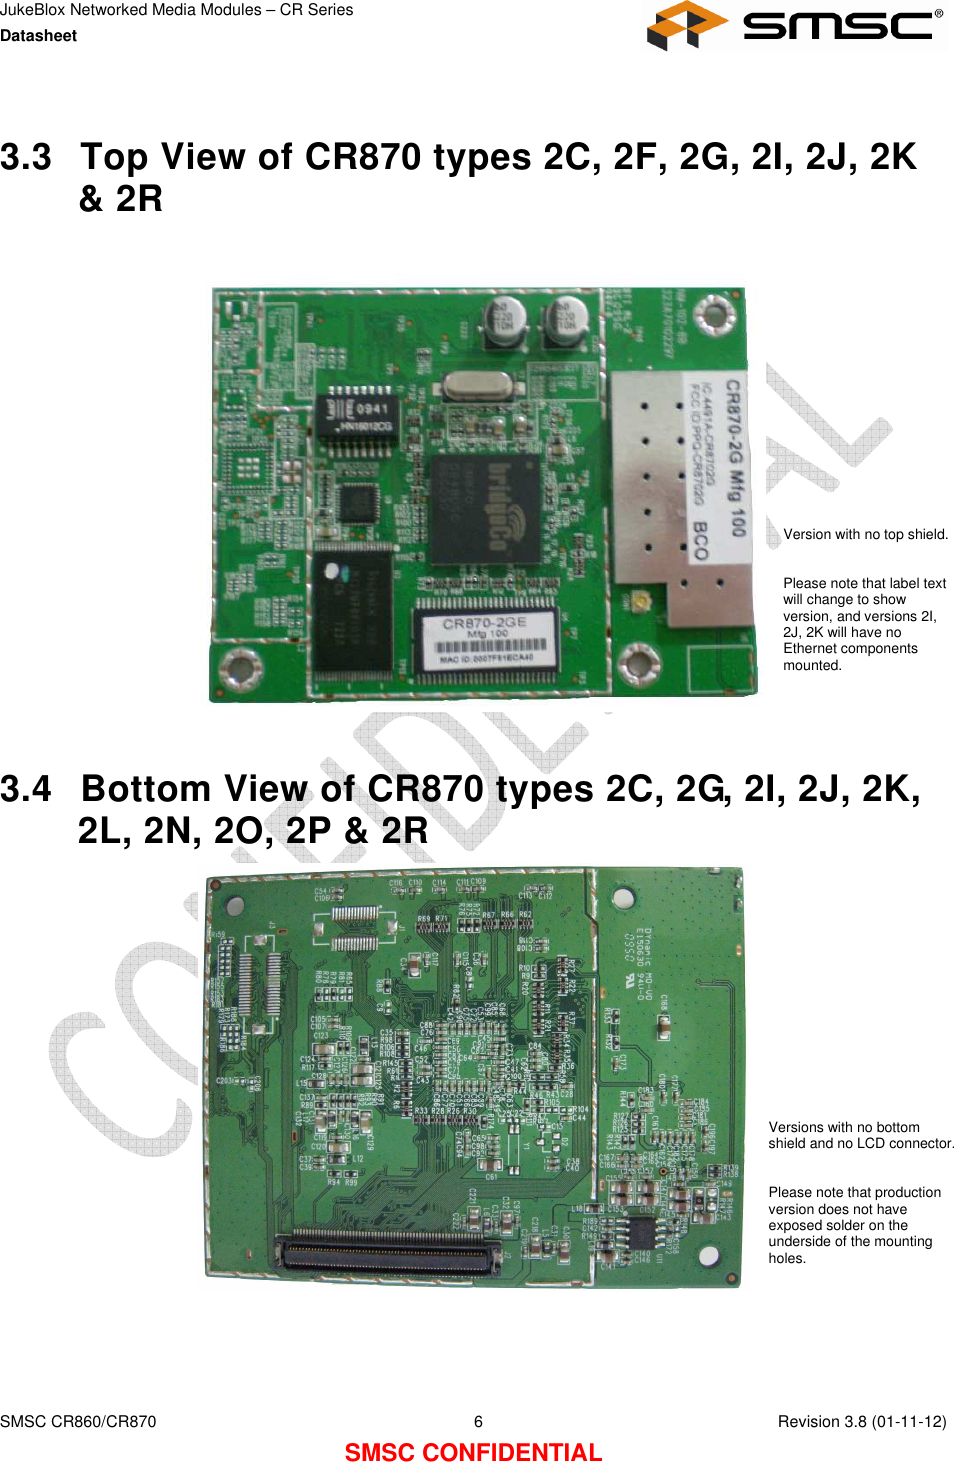 JukeBlox Networked Media Modules – CR Series Datasheet    SMSC CR860/CR870  6    Revision 3.8 (01-11-12) SMSC CONFIDENTIAL  3.3  Top View of CR870 types 2C, 2F, 2G, 2I, 2J, 2K &amp; 2R                    3.4  Bottom View of CR870 types 2C, 2G, 2I, 2J, 2K, 2L, 2N, 2O, 2P &amp; 2R     Version with no top shield.  Please note that label text will change to show version, and versions 2I, 2J, 2K will have no Ethernet components mounted. Versions with no bottom shield and no LCD connector.  Please note that production version does not have exposed solder on the underside of the mounting holes. 